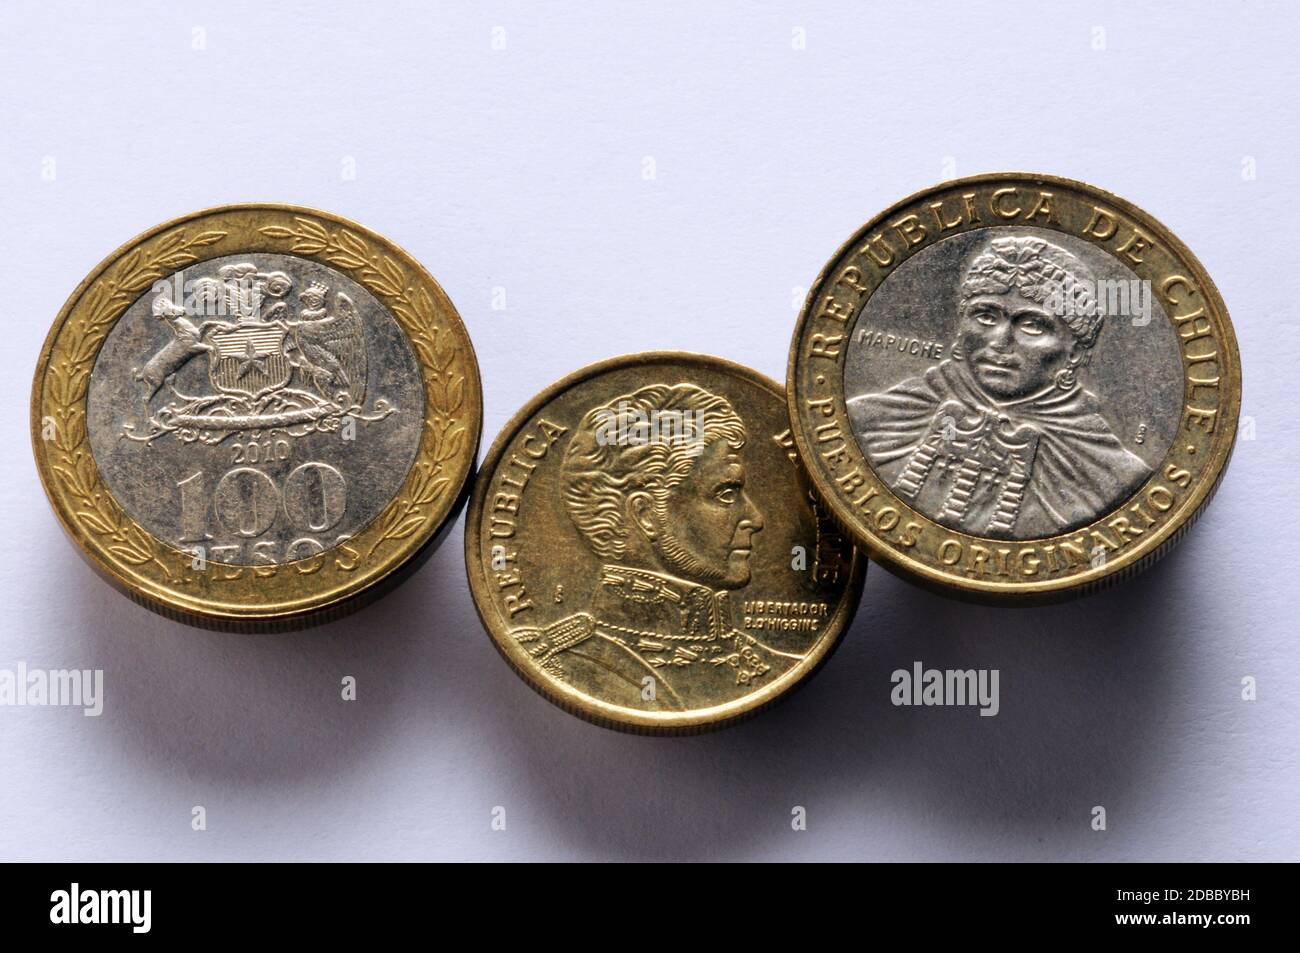 Coins of the Chilean peso in circulation. Stock Photo